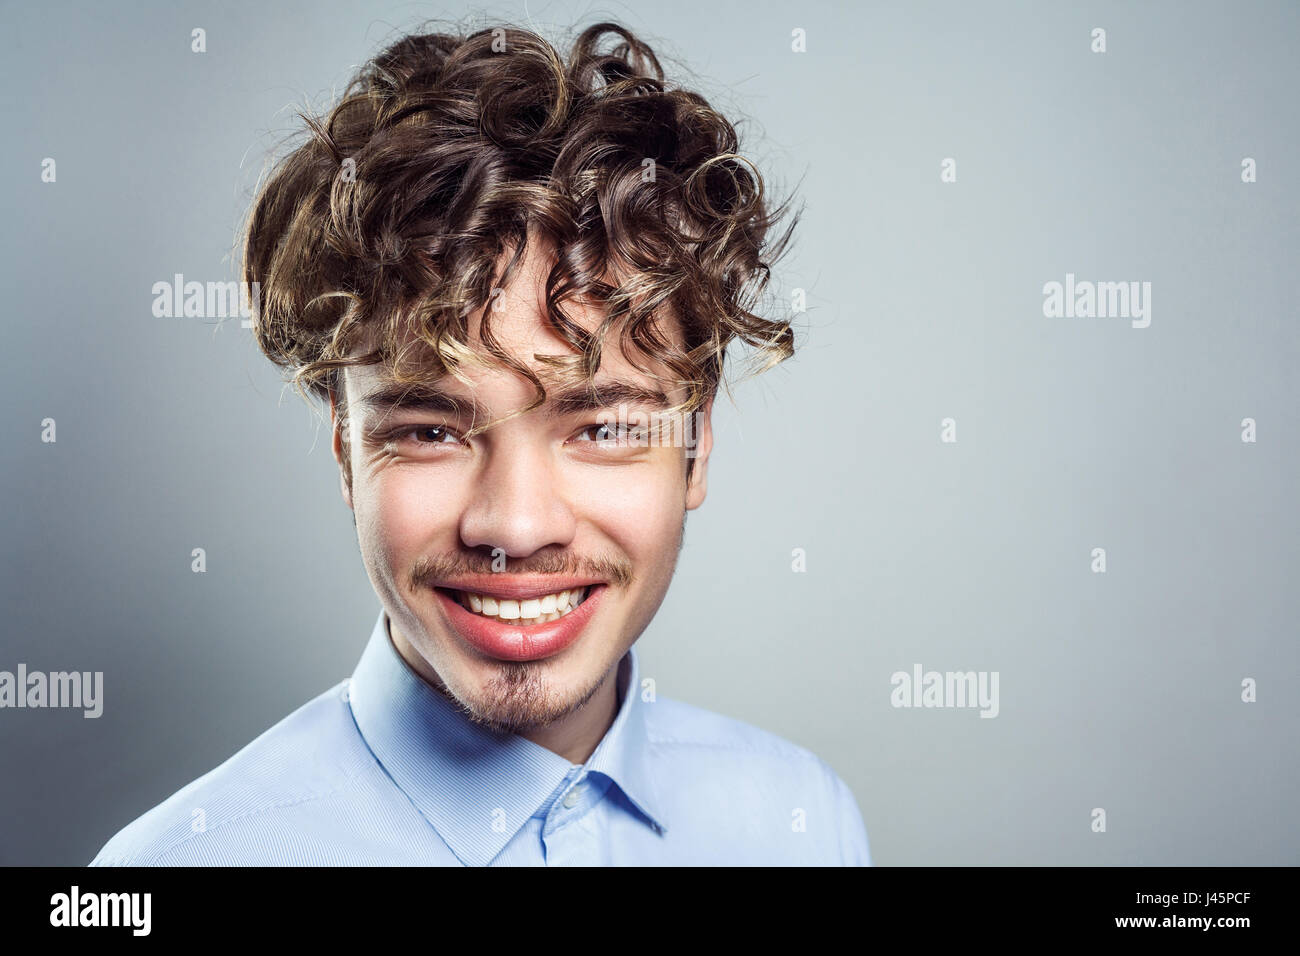 Portrait of young man with curly hairstyle. studio shot. looking at camera with toothy smile. Stock Photo